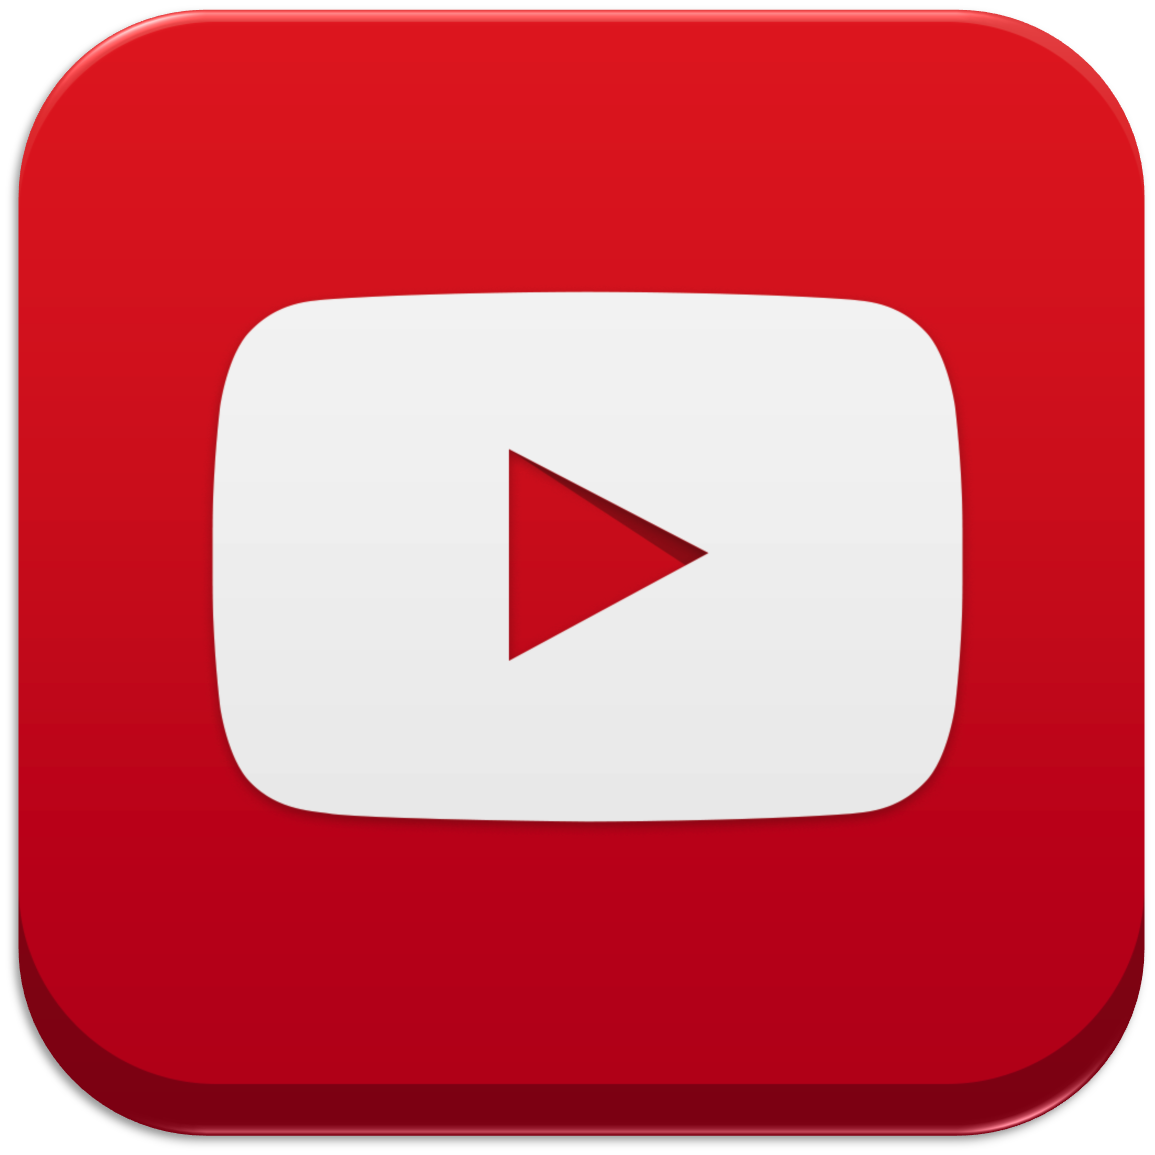 Youtube Play Button Png Images Youtube Video Play Buttons Free Download Free Transparent Png Logos